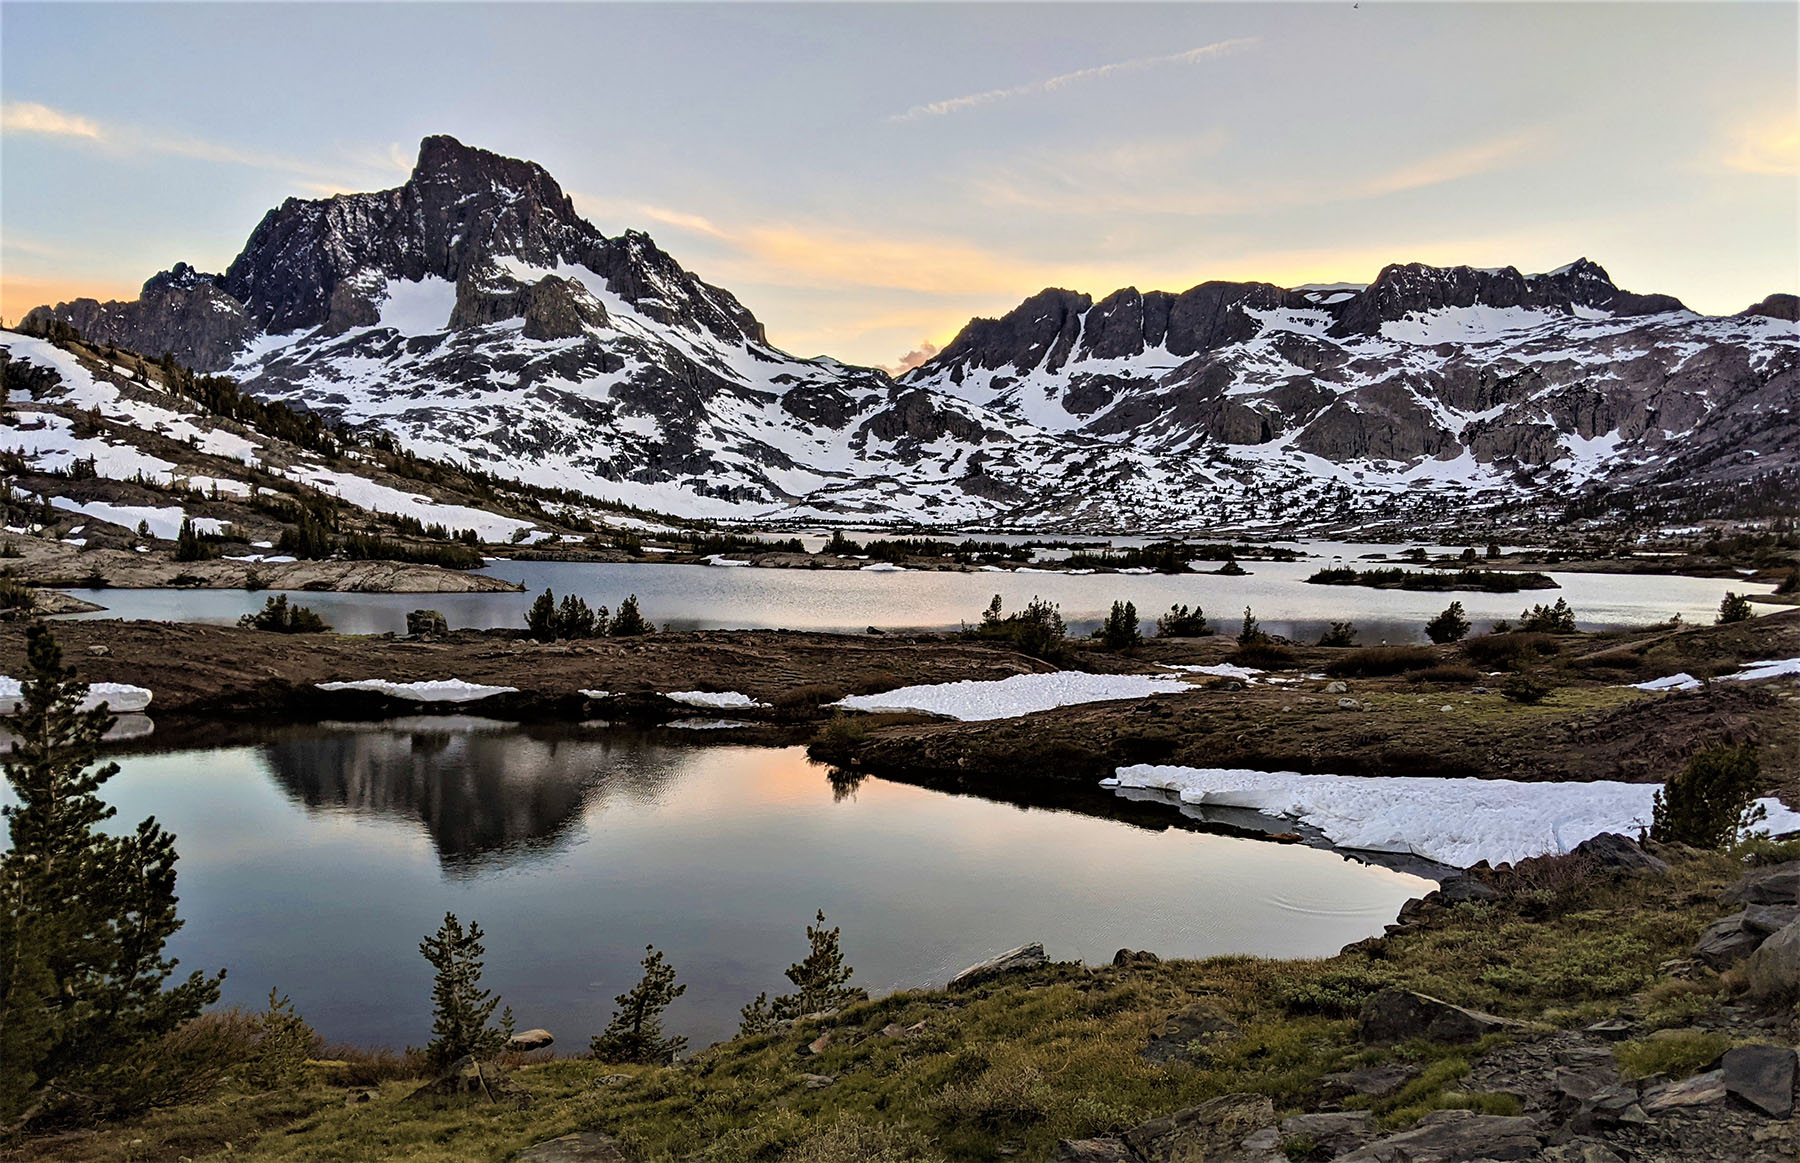 Spring snowmelt in the Ansel Adams Wilderness of the California Sierra Nevada against a setting sky.